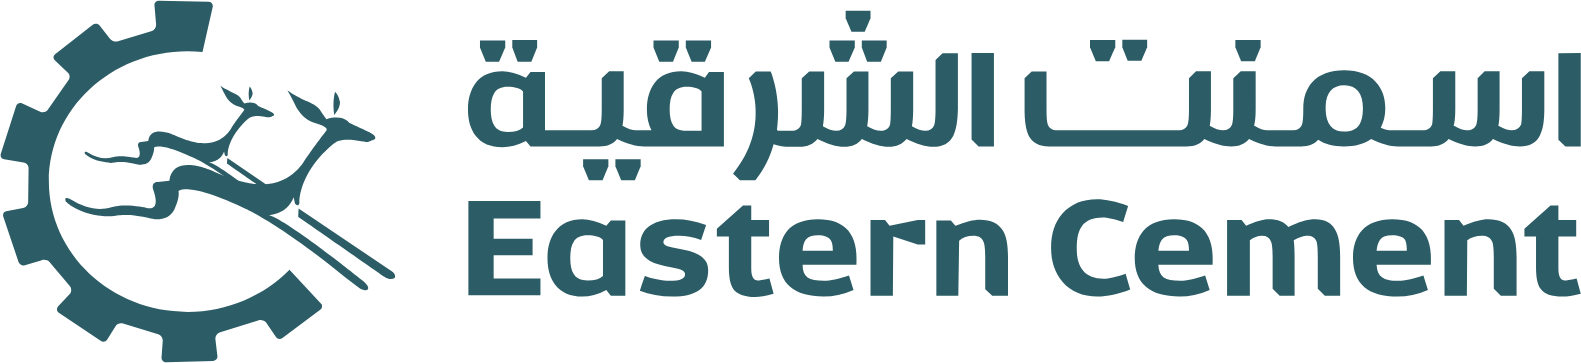 Eastern Province Cement Company logo large (transparent PNG)